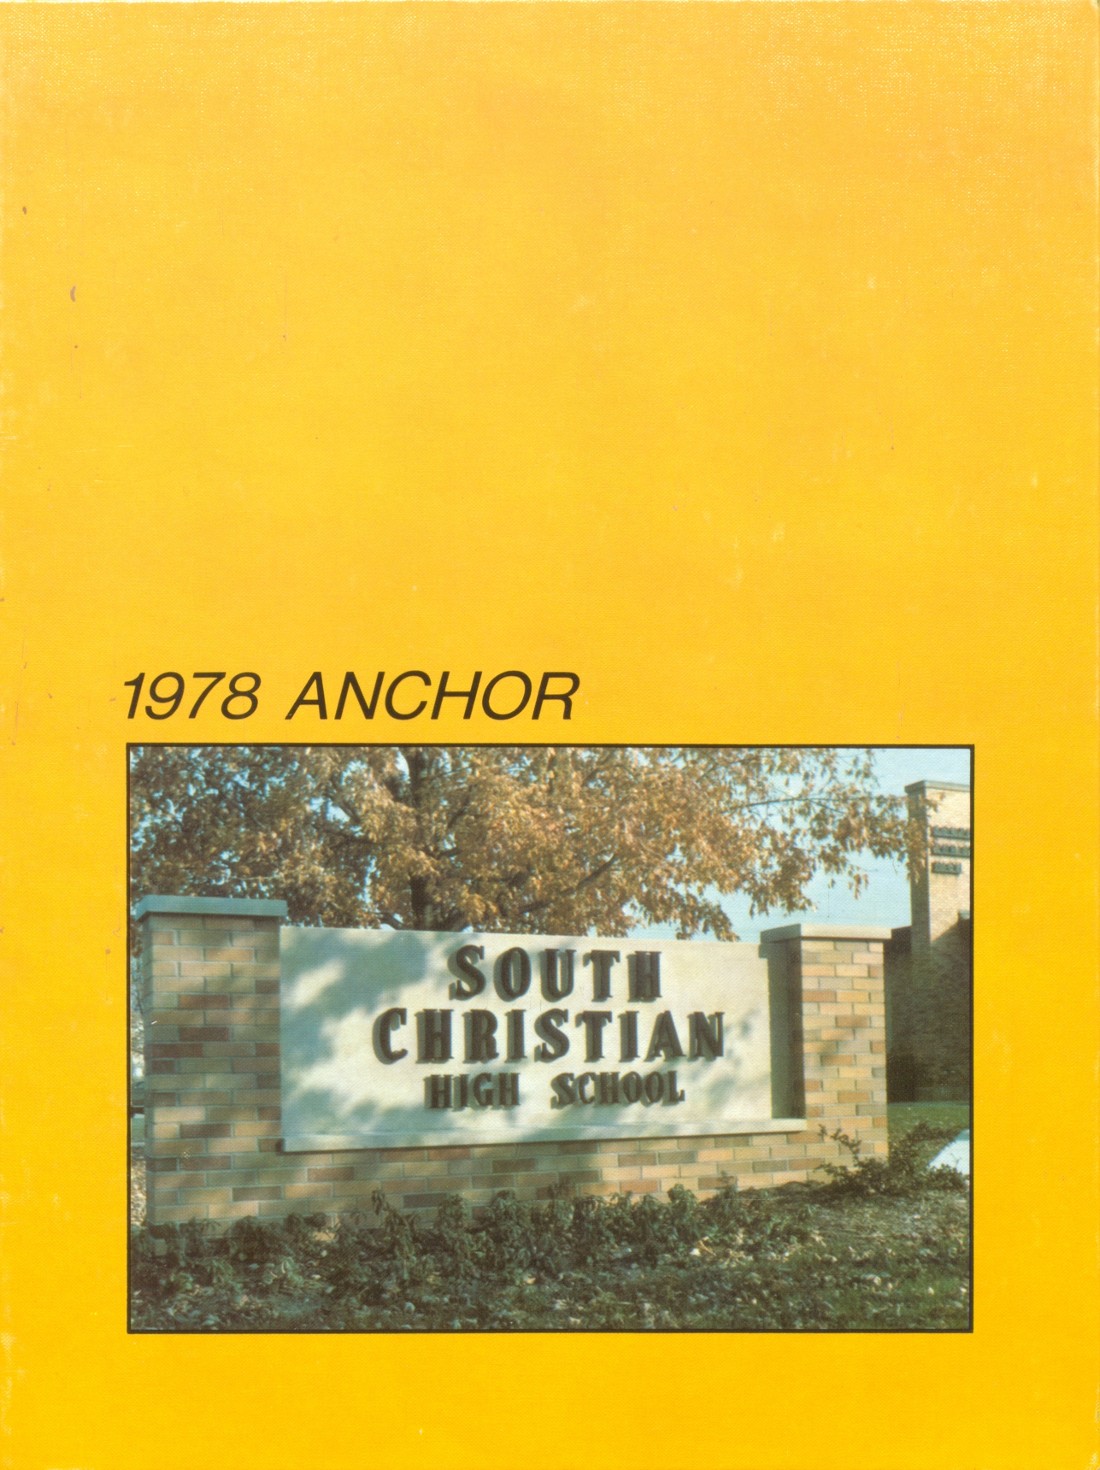 1978 yearbook from South Christian High School from Grand rapids